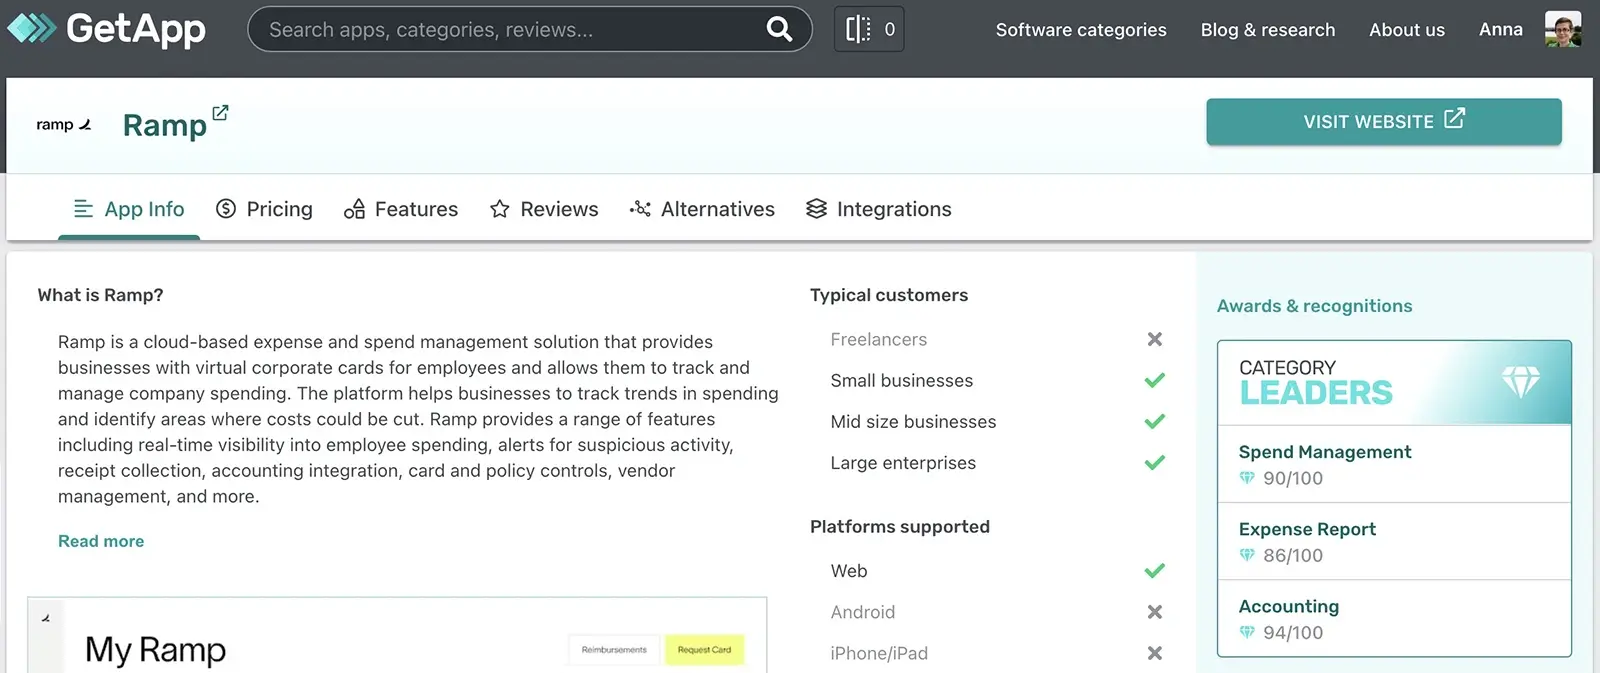 What's an example of a GetApp vendor profile?